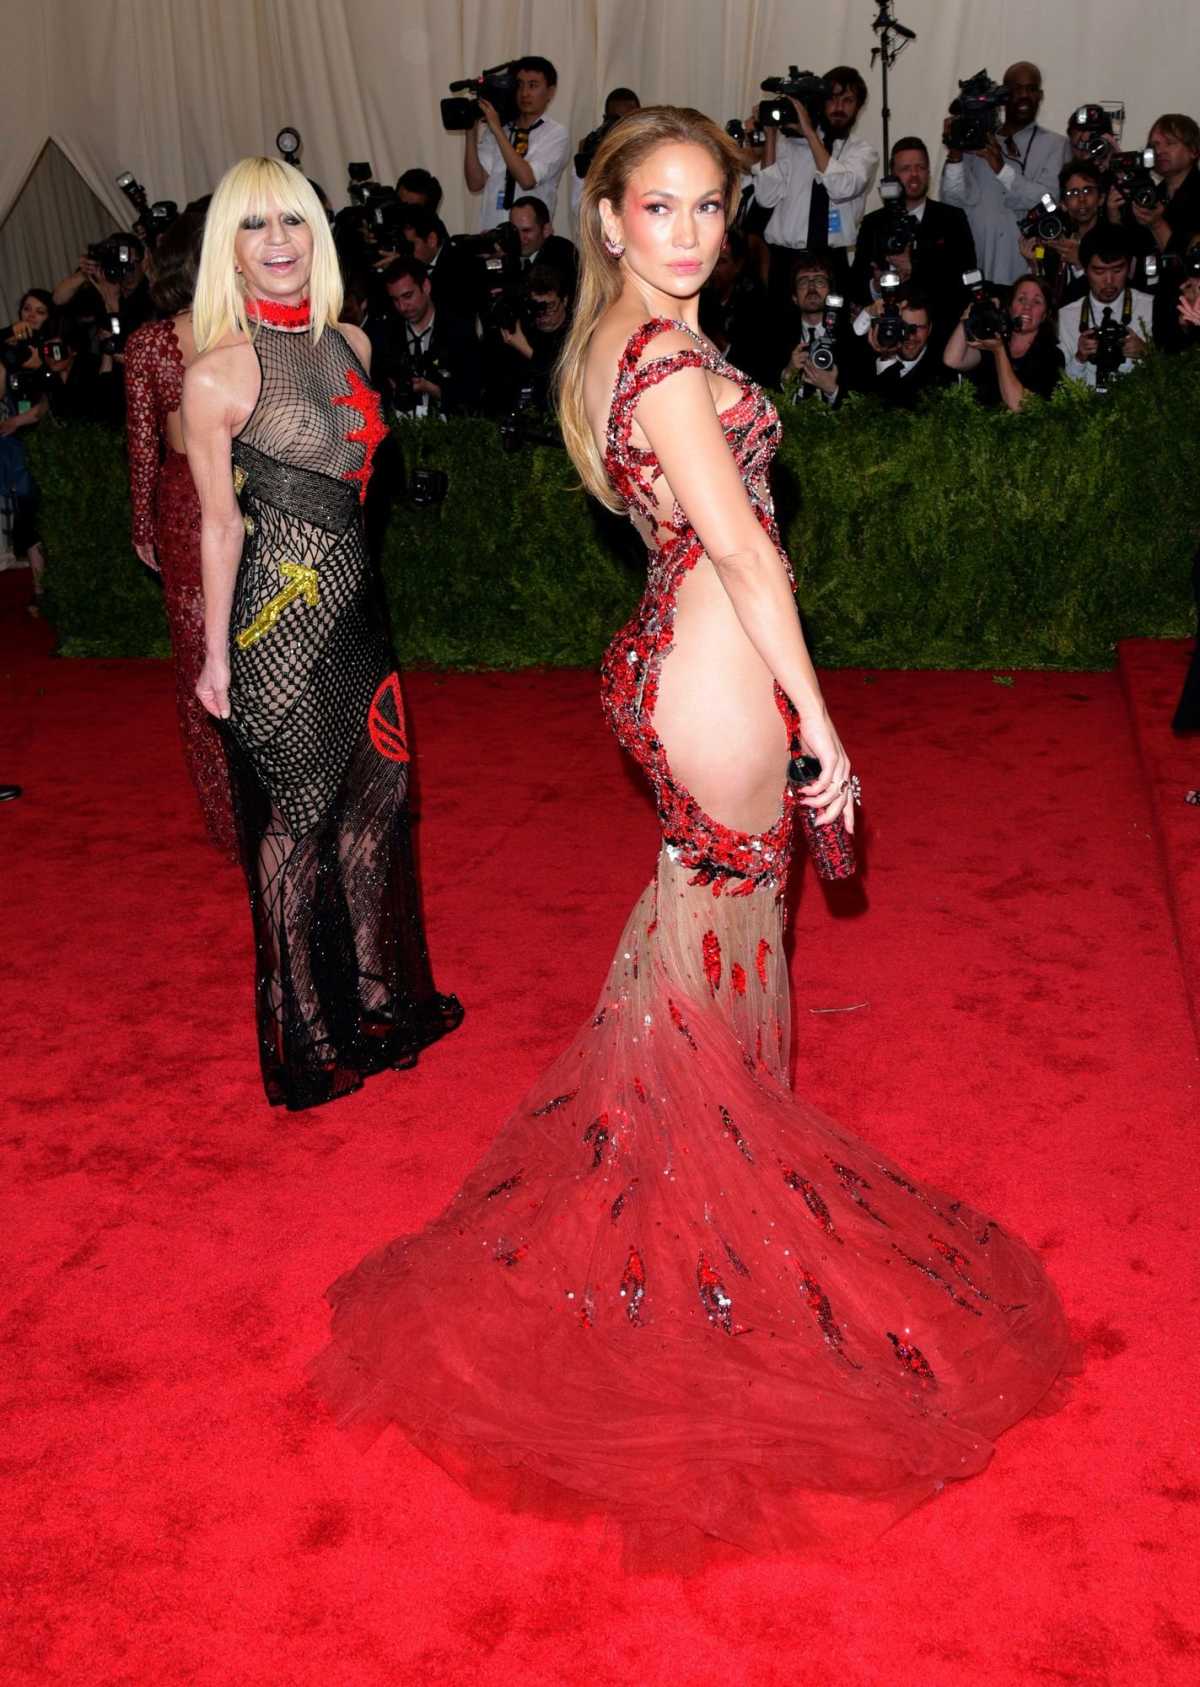 J.Lo's sheer red Versace moment at the 2015 Met Gala made her booty steal the show.